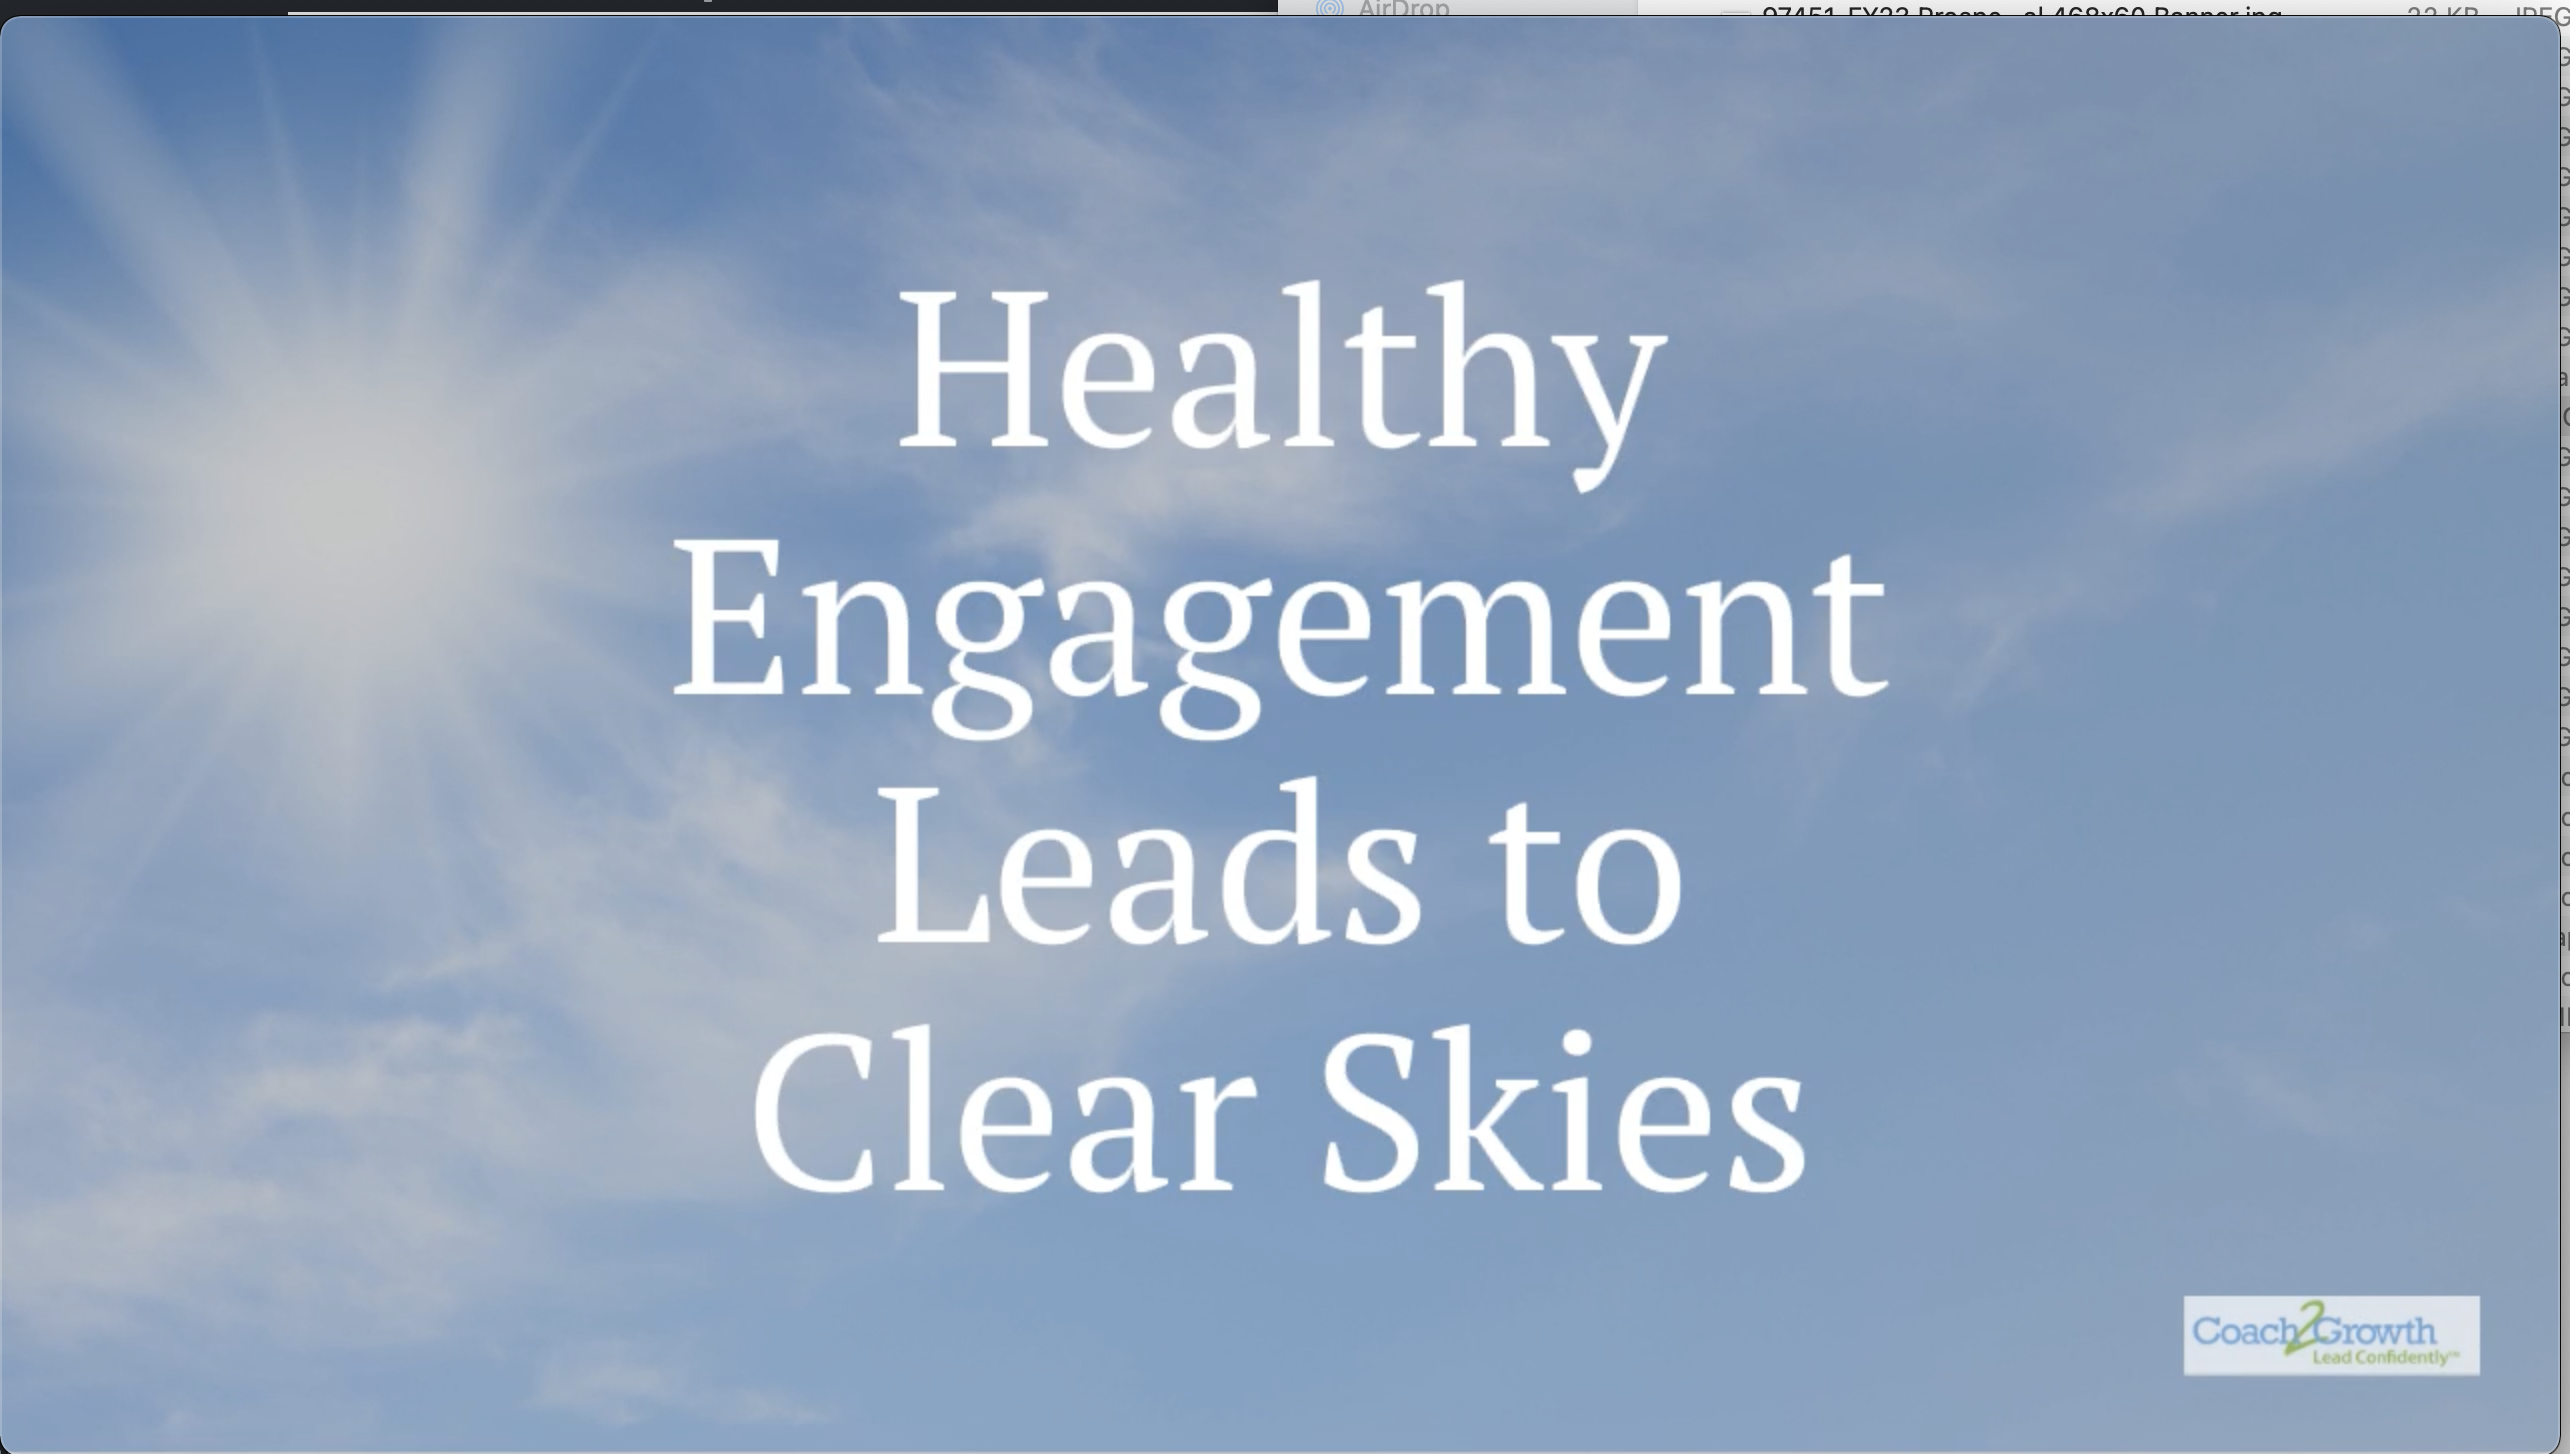 Healthy Engagement Leads to Clear Skies